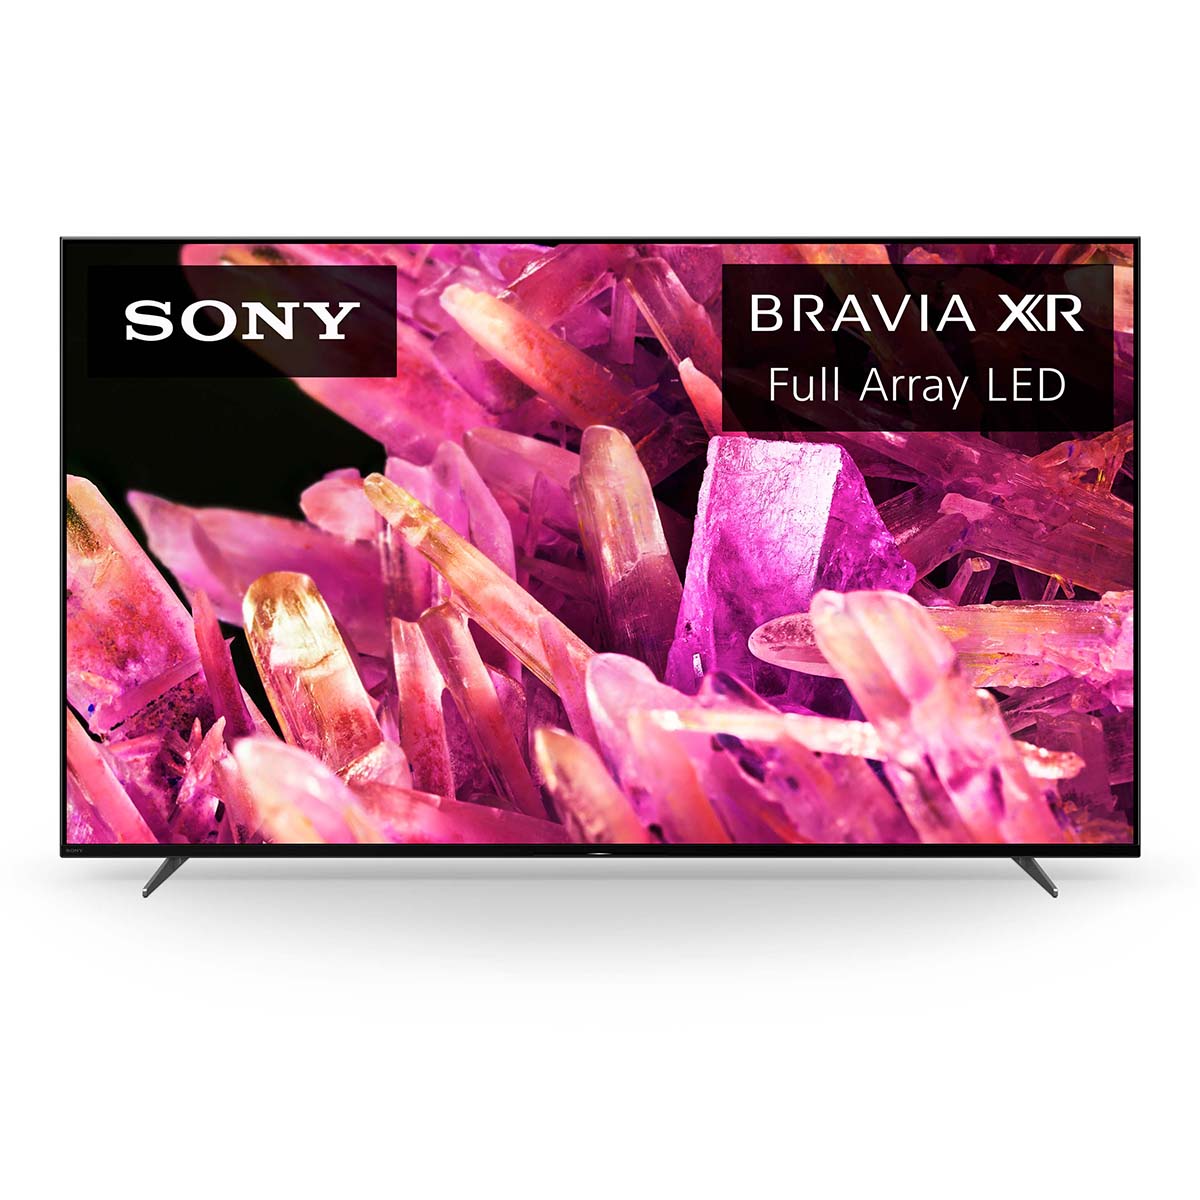 Great visuals, big screens, and affordable prices! 1 x90k 65 sony bravia xr frnt 1 2